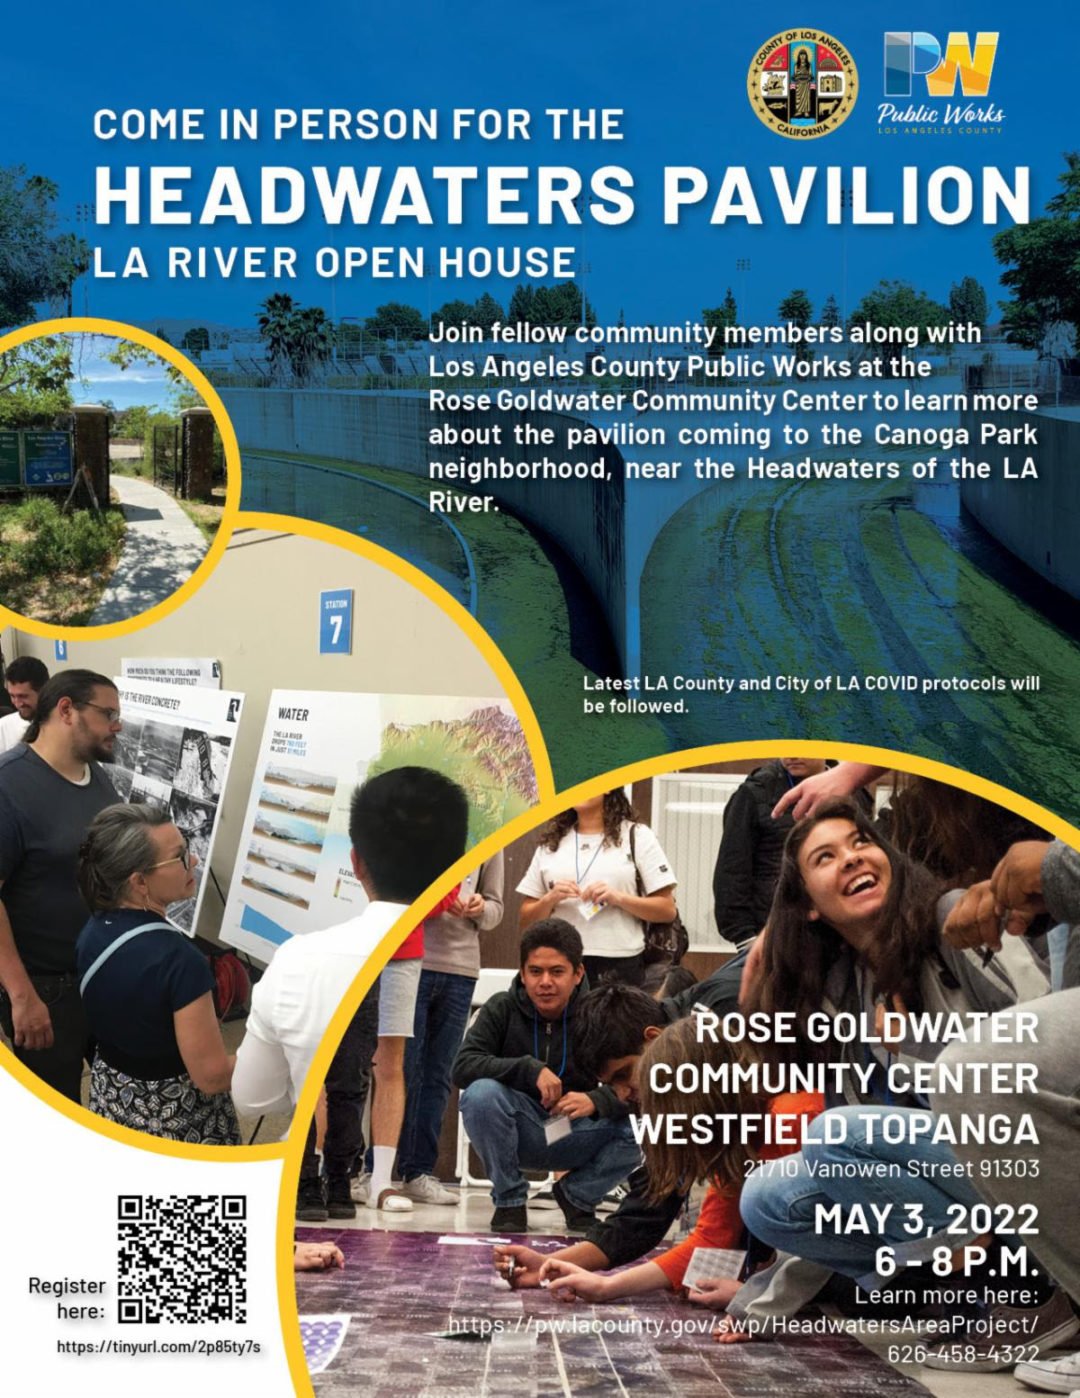 Headwaters Pavilion LA River Open House – May 3, 2022